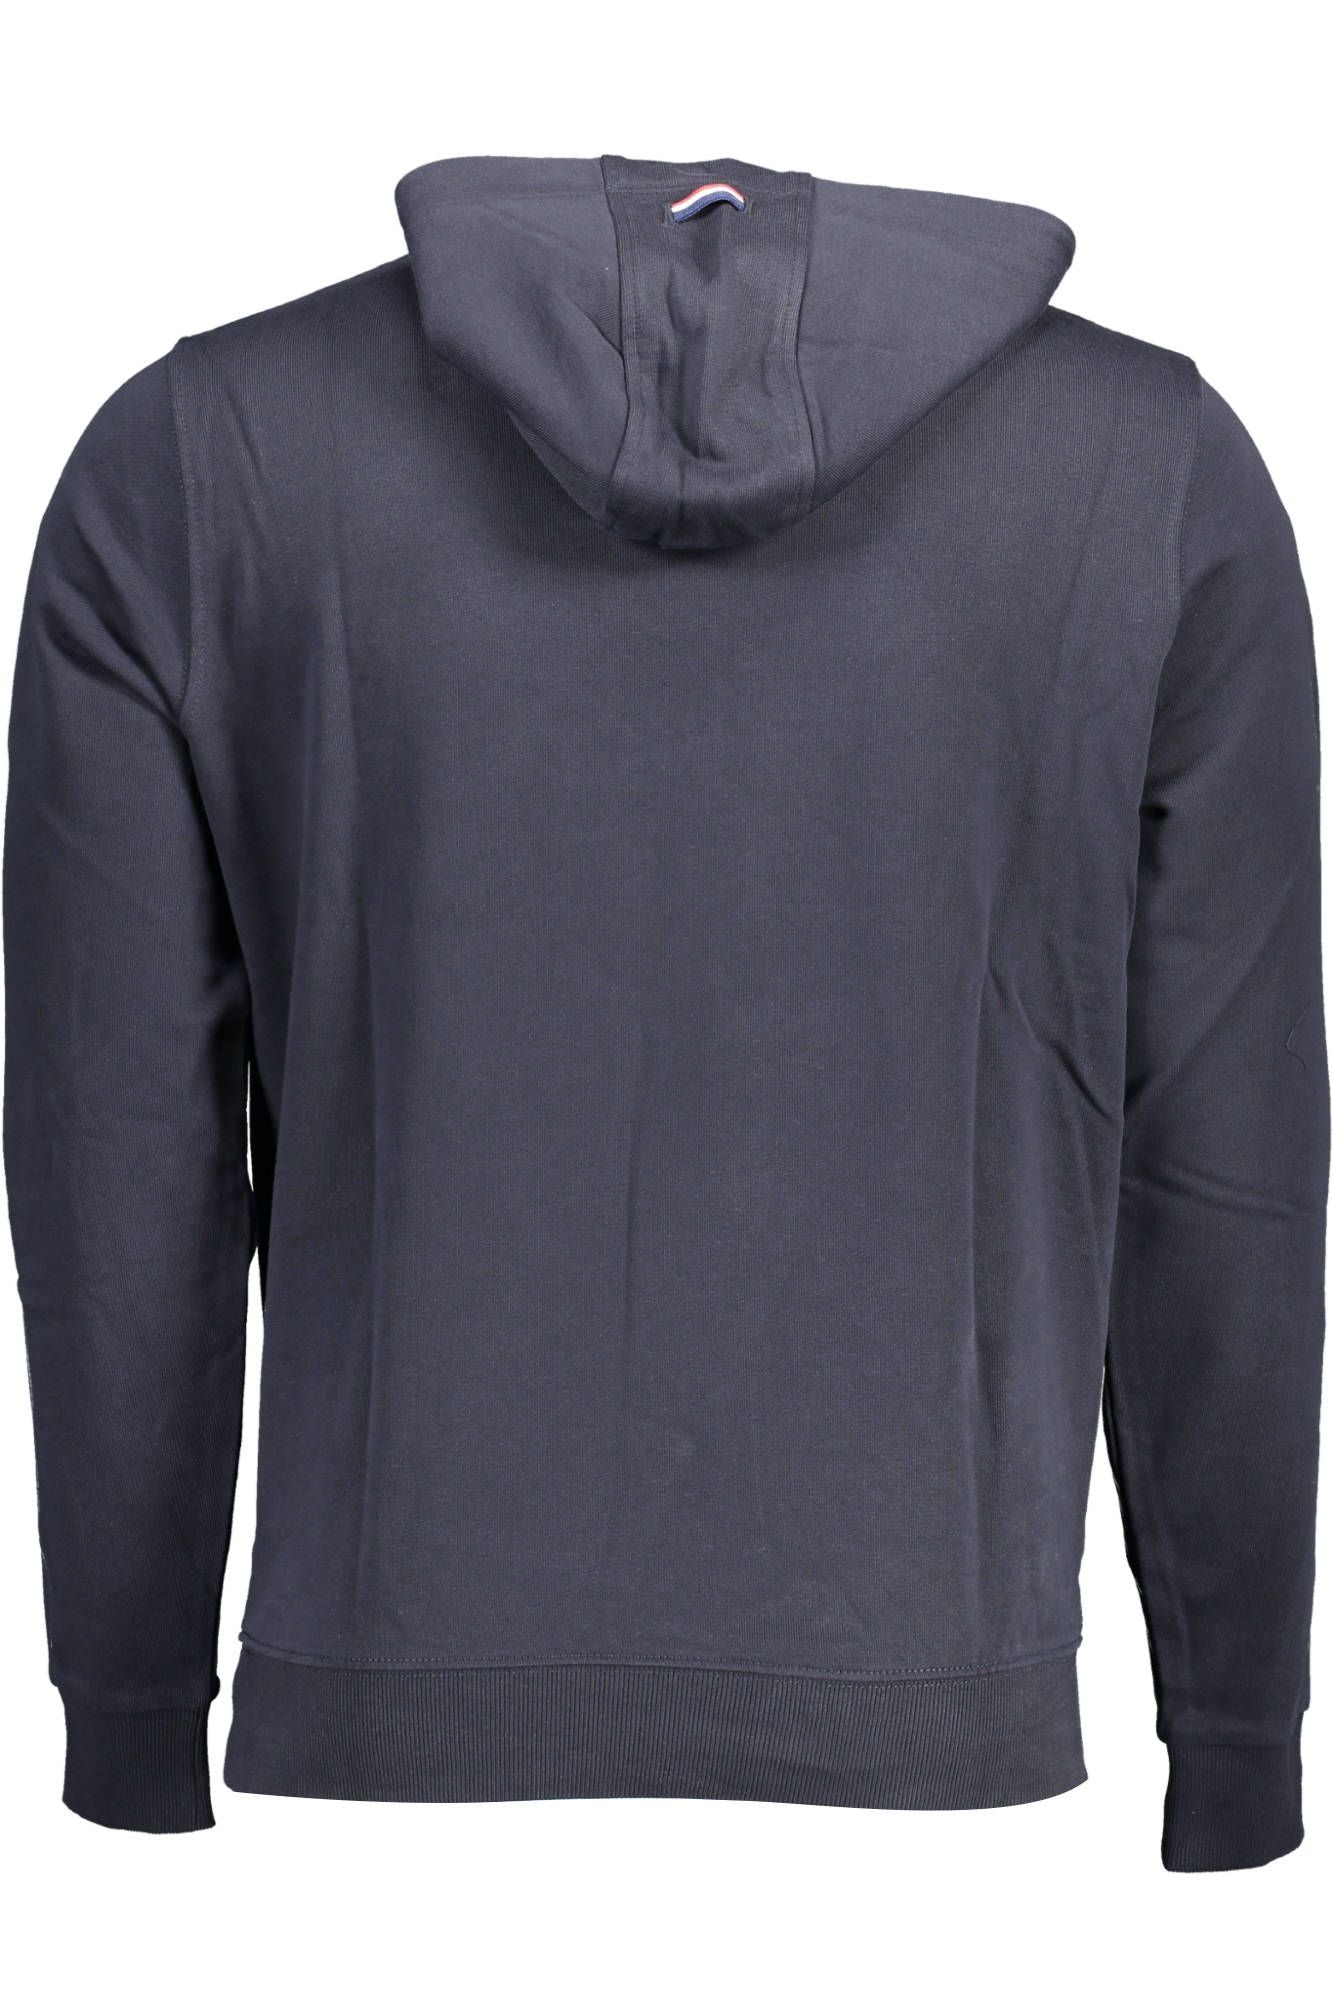 Classic Blue Hooded Sweatshirt with Central Pocket and Logo